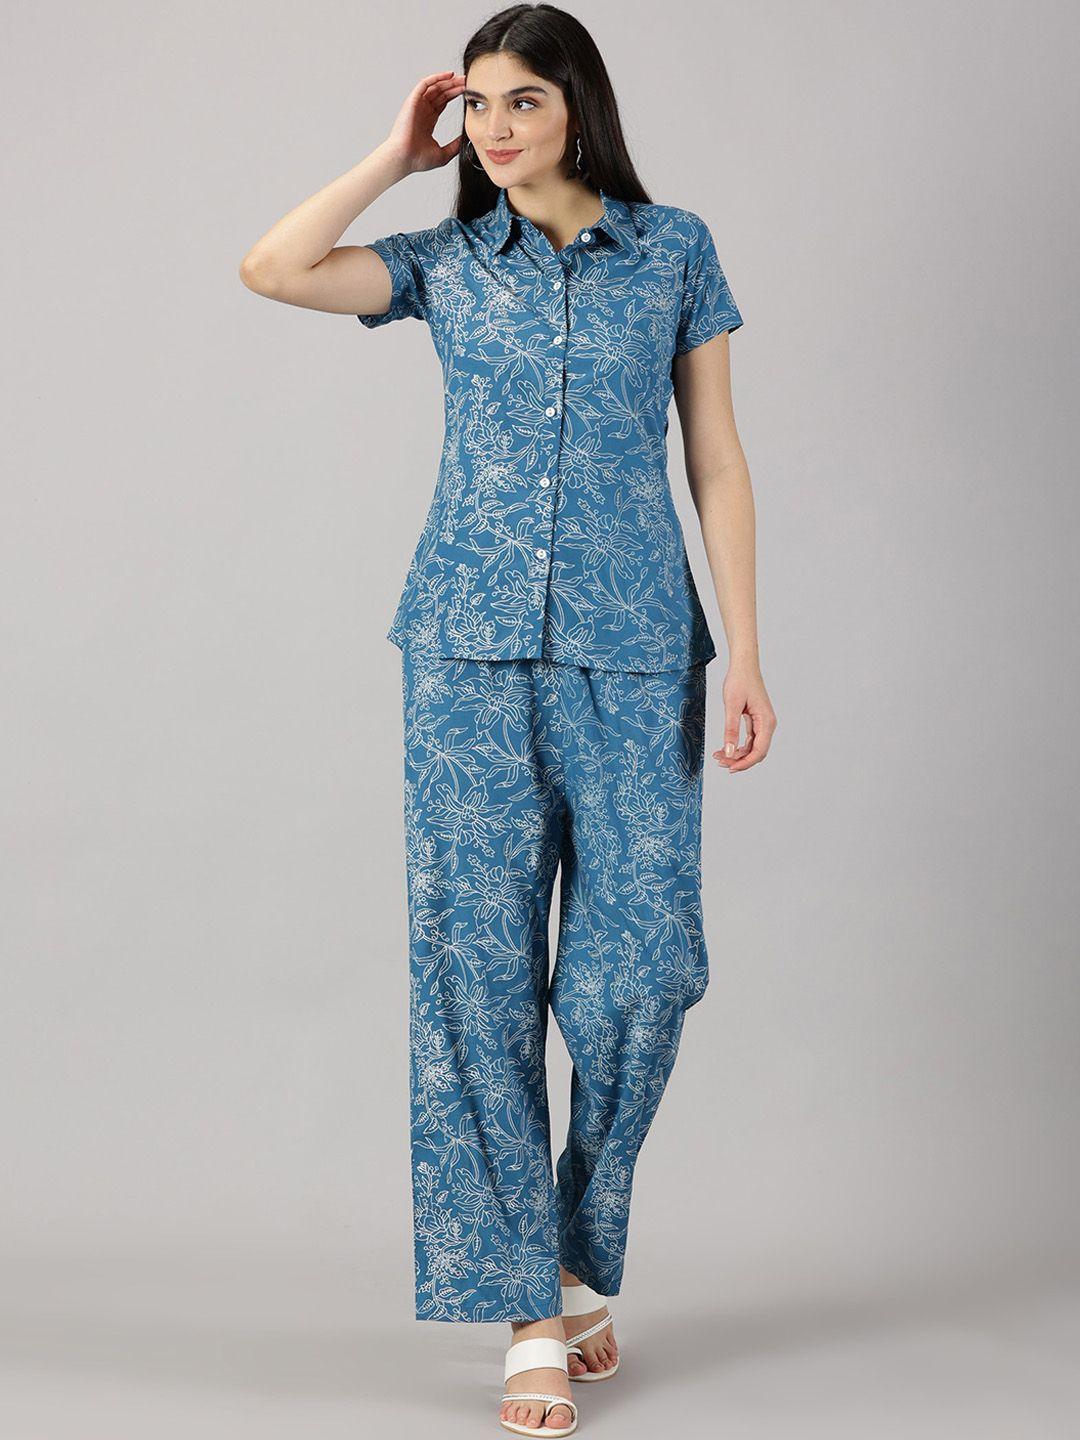 purshottam-wala-printed-shirt-with-trousers-co-ords